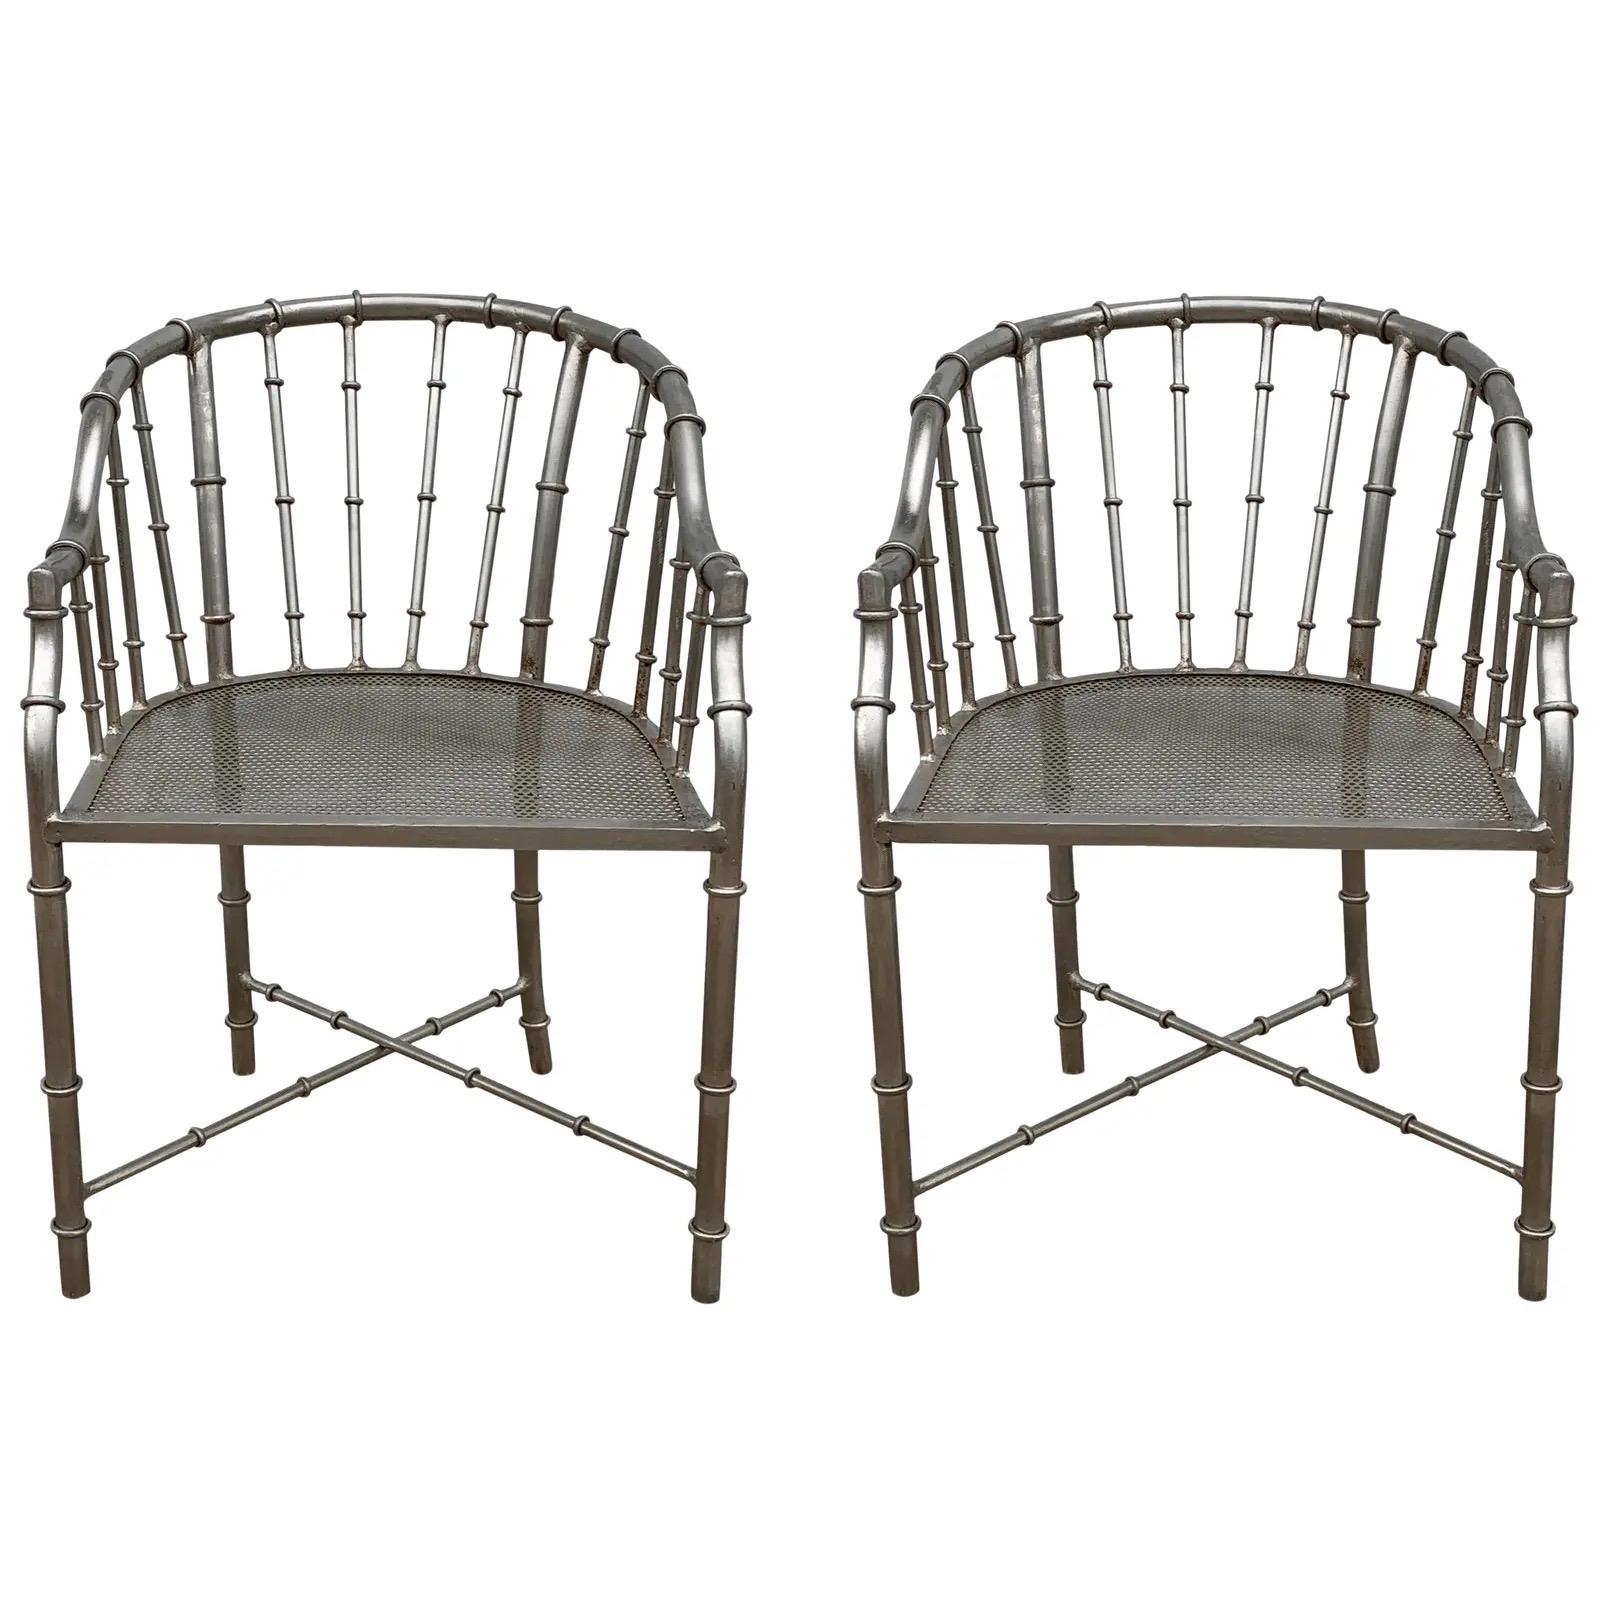 1960s French Jacques Adnet Style Faux Bamboo Steel Chairs, Pair